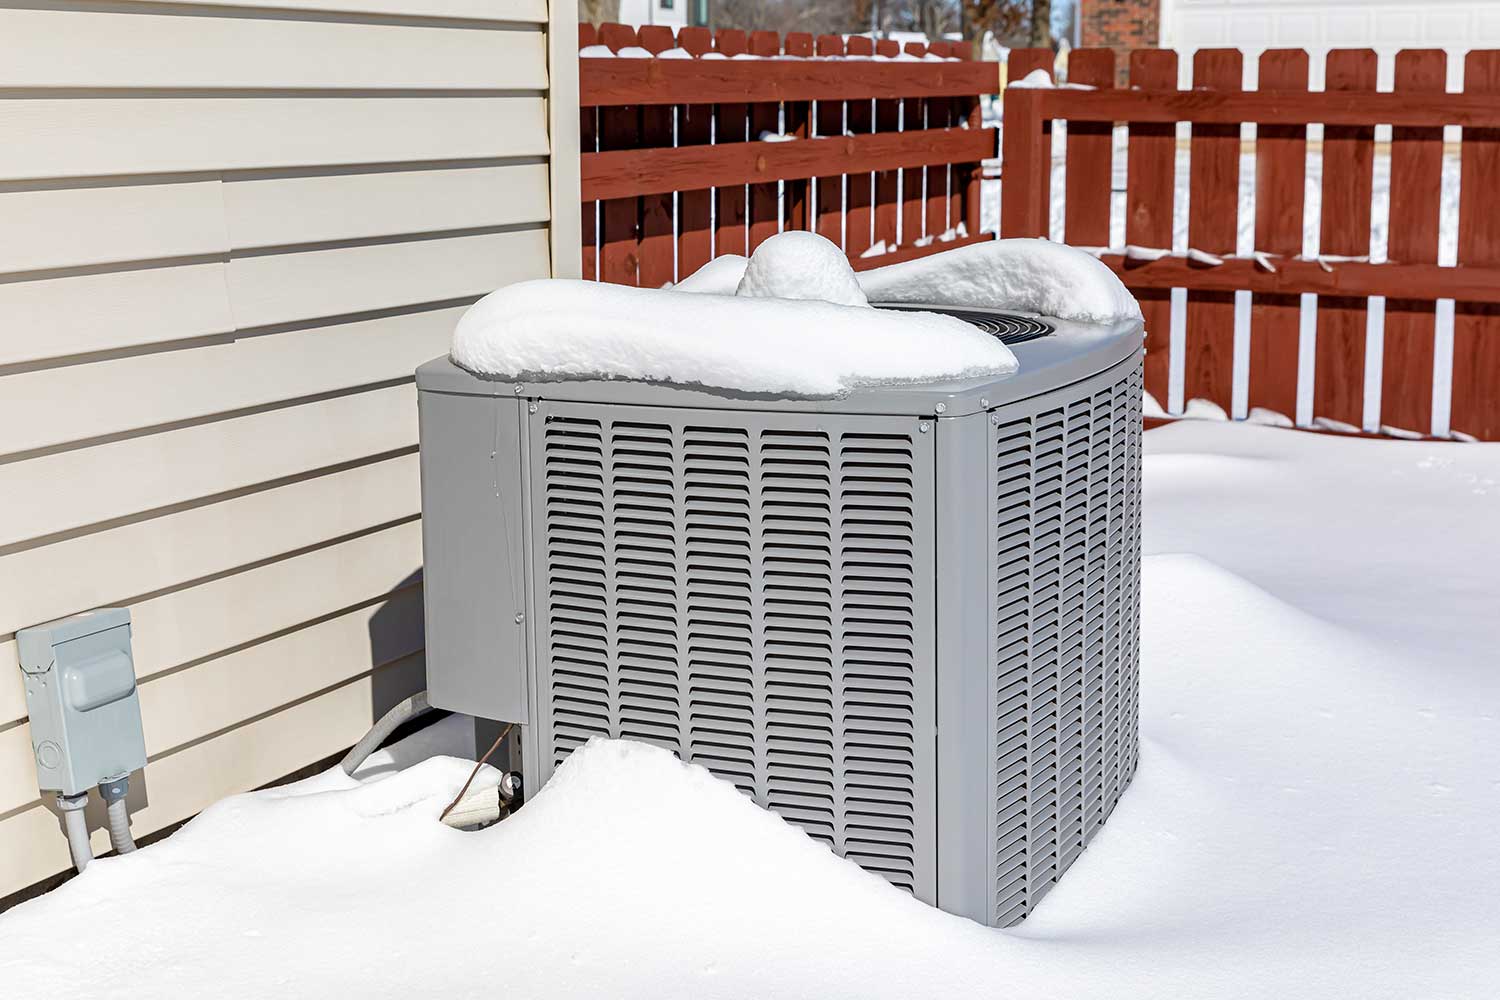 It is not always cheap to get the best HVAC unit